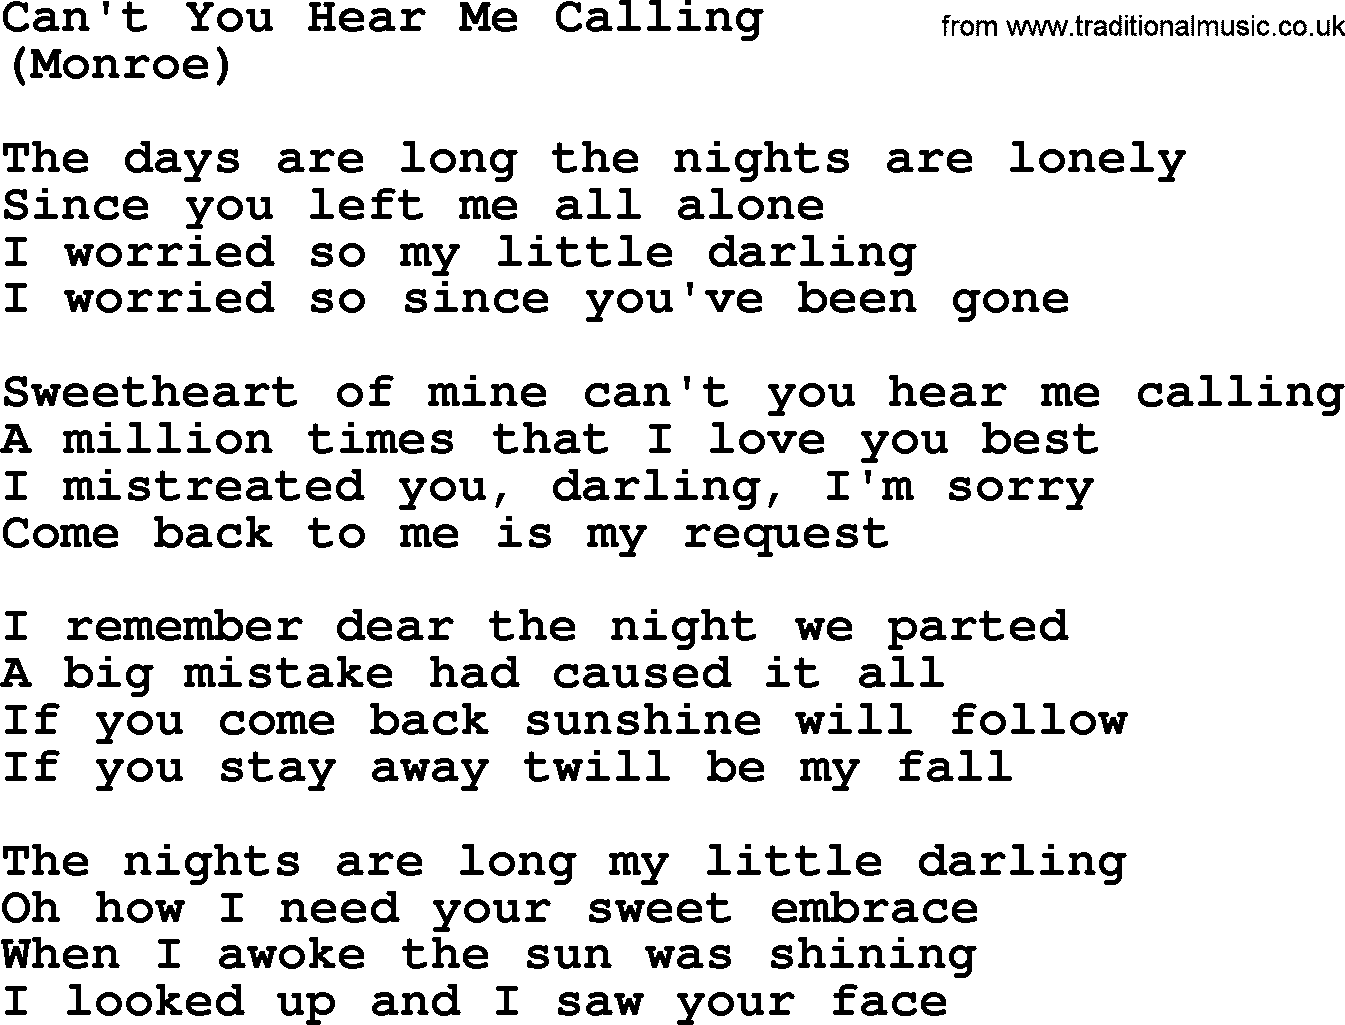 The Byrds song Can't You Hear Me Calling, lyrics